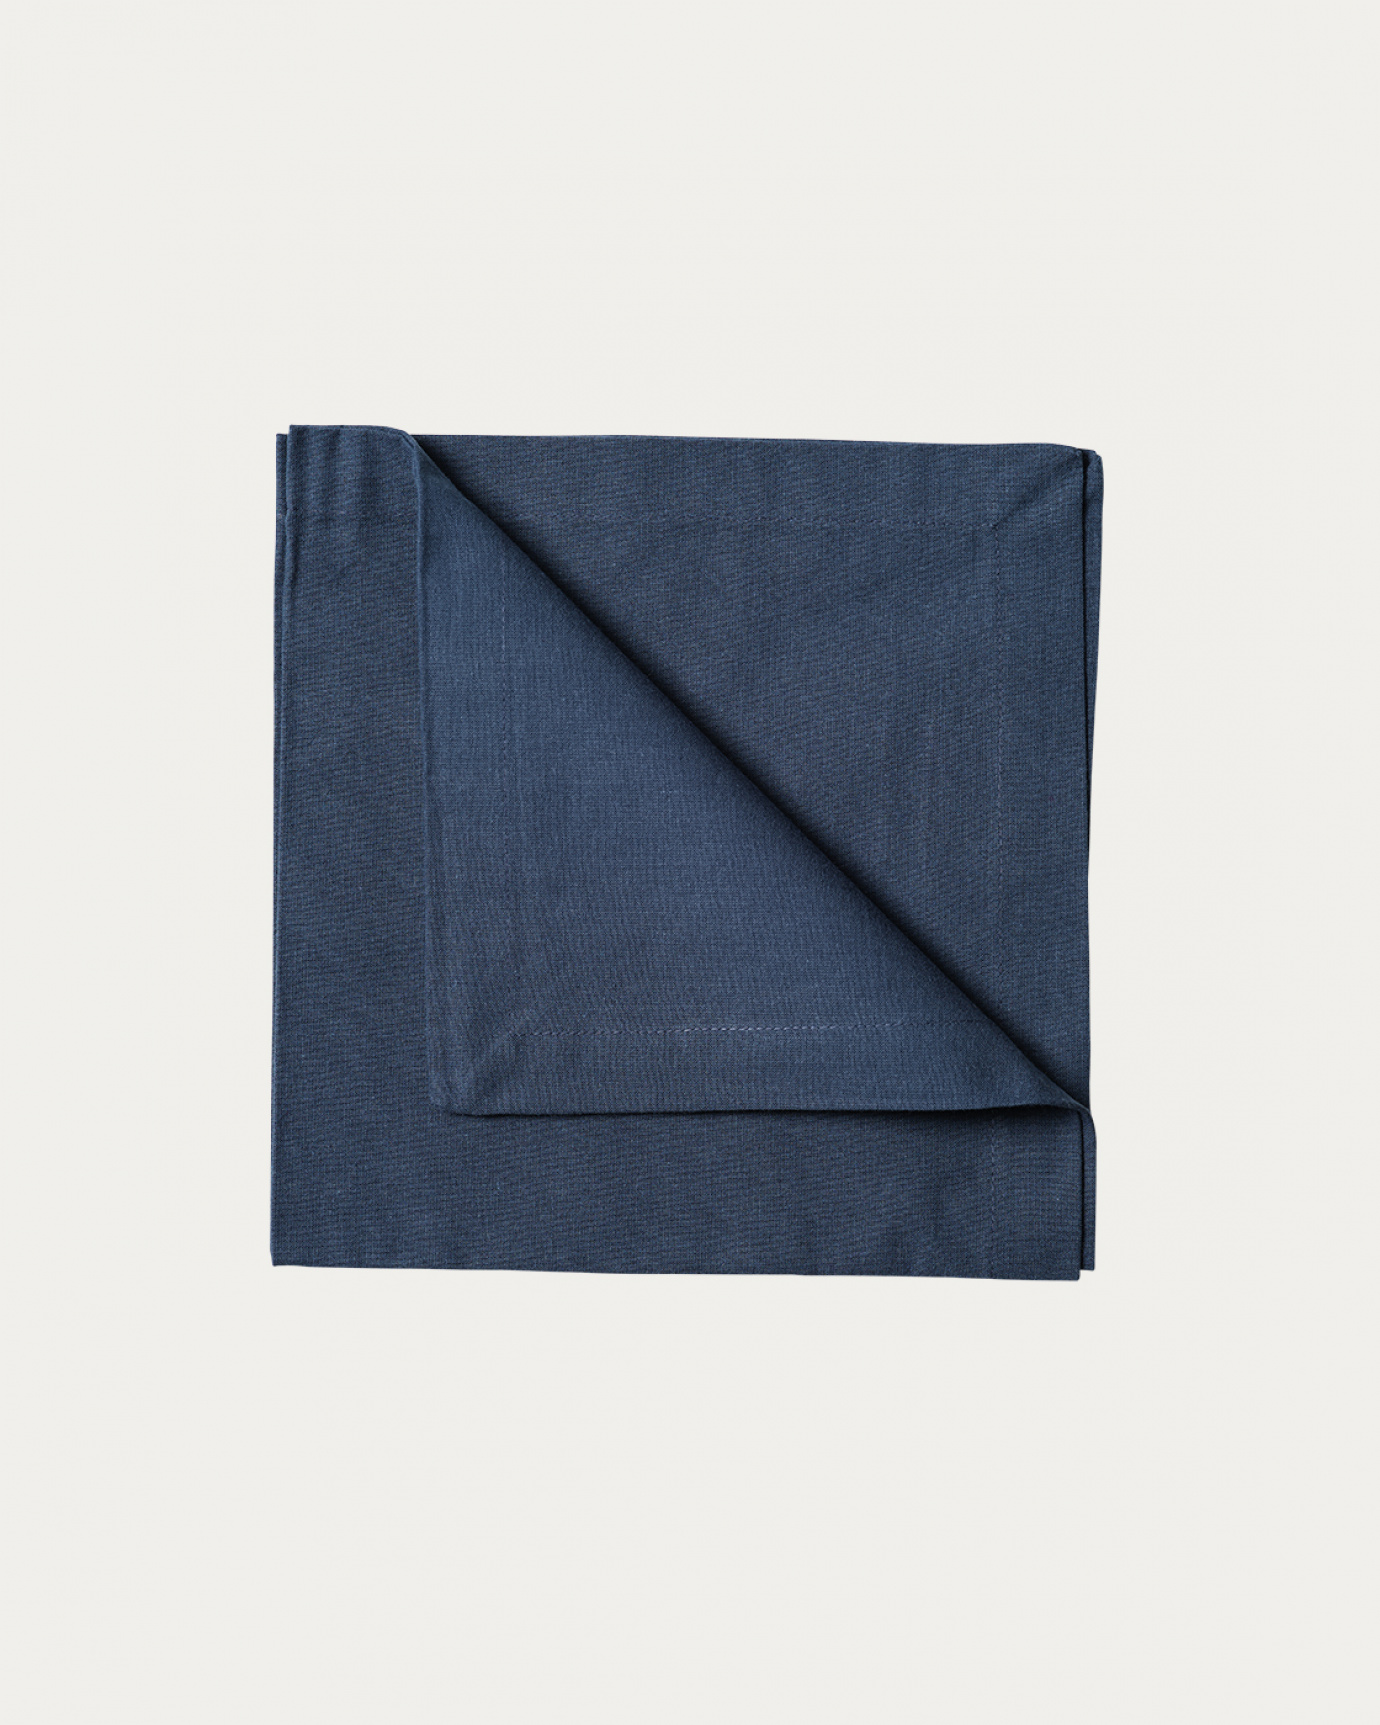 Product image indigo blue ROBERT napkin made of soft cotton from LINUM DESIGN. Size 45x45 cm and sold in 4-pack.